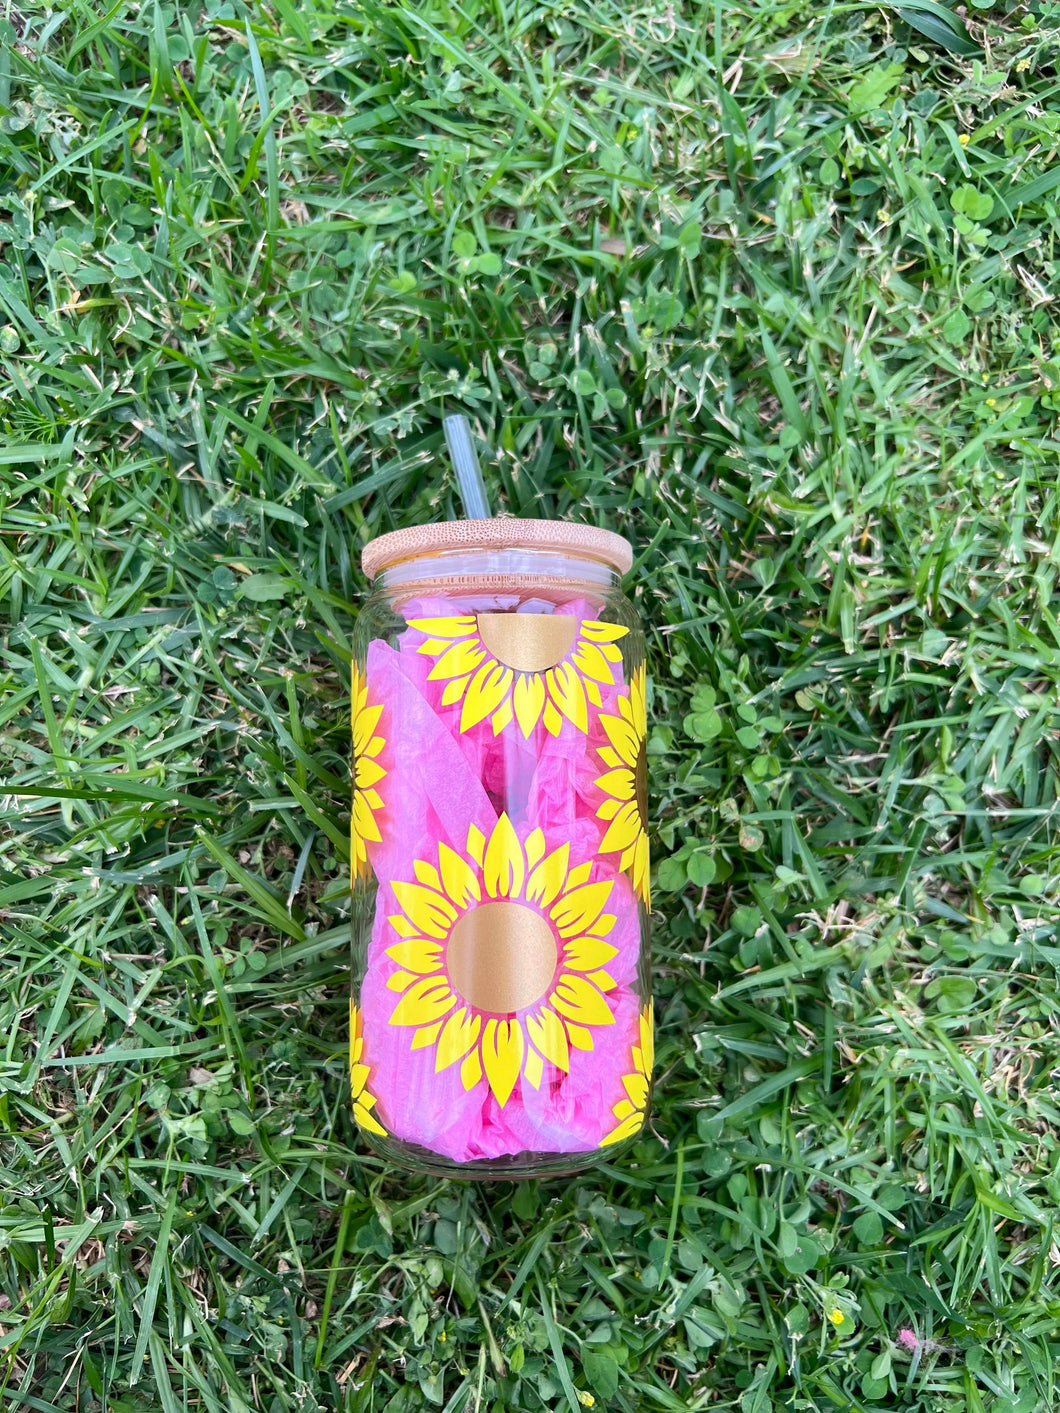 NEW! 16oz Sunflower Glass Cup